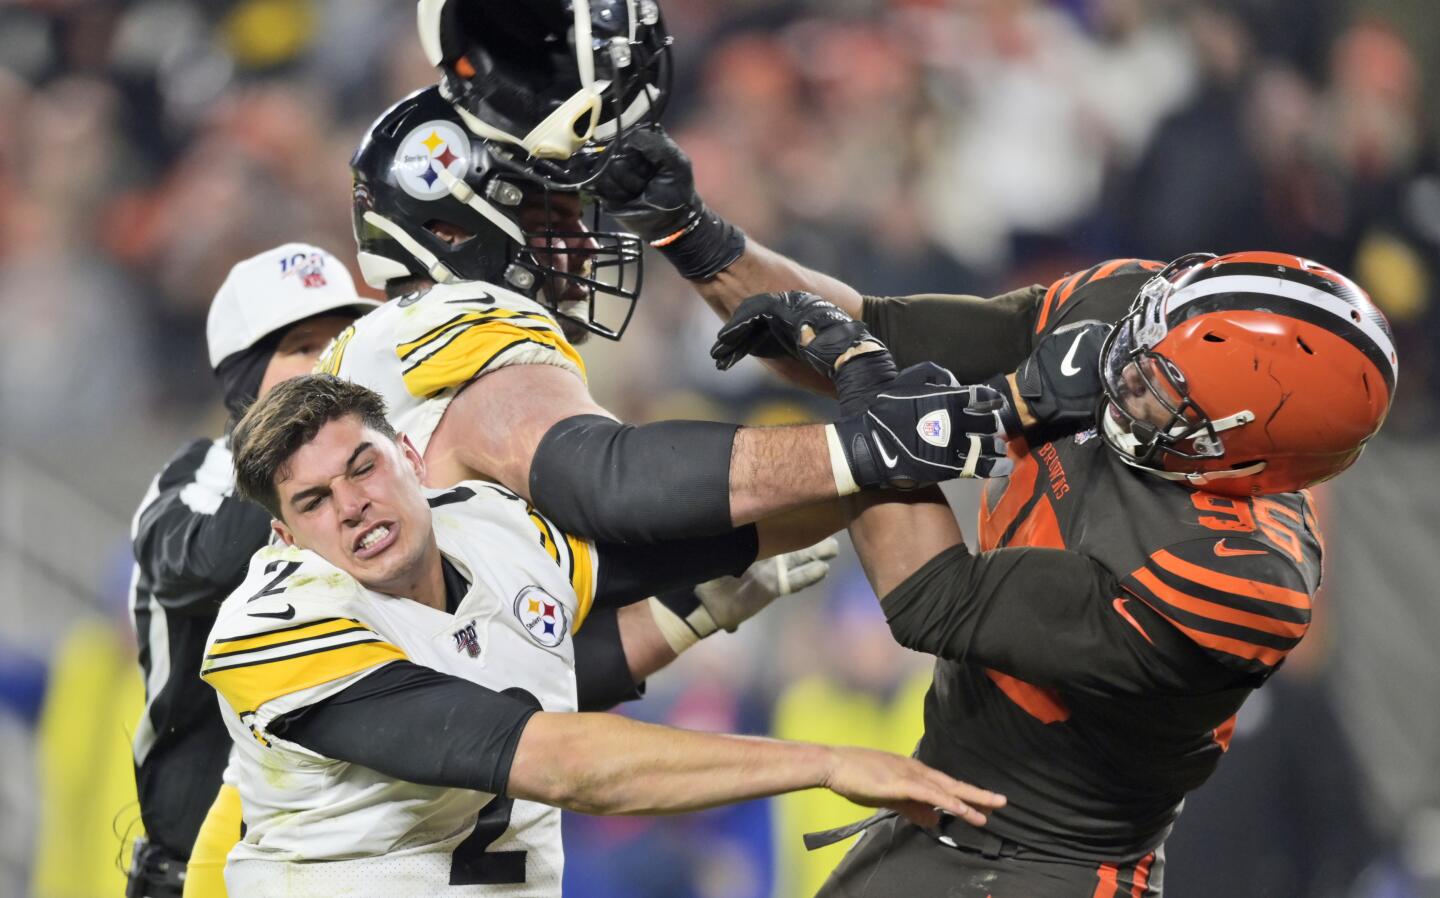 Browns defensive end Myles Garrett (95) hits Steelers quarterback Mason Rudolph (2) with a helmet during the second half of a game Nov. 14.